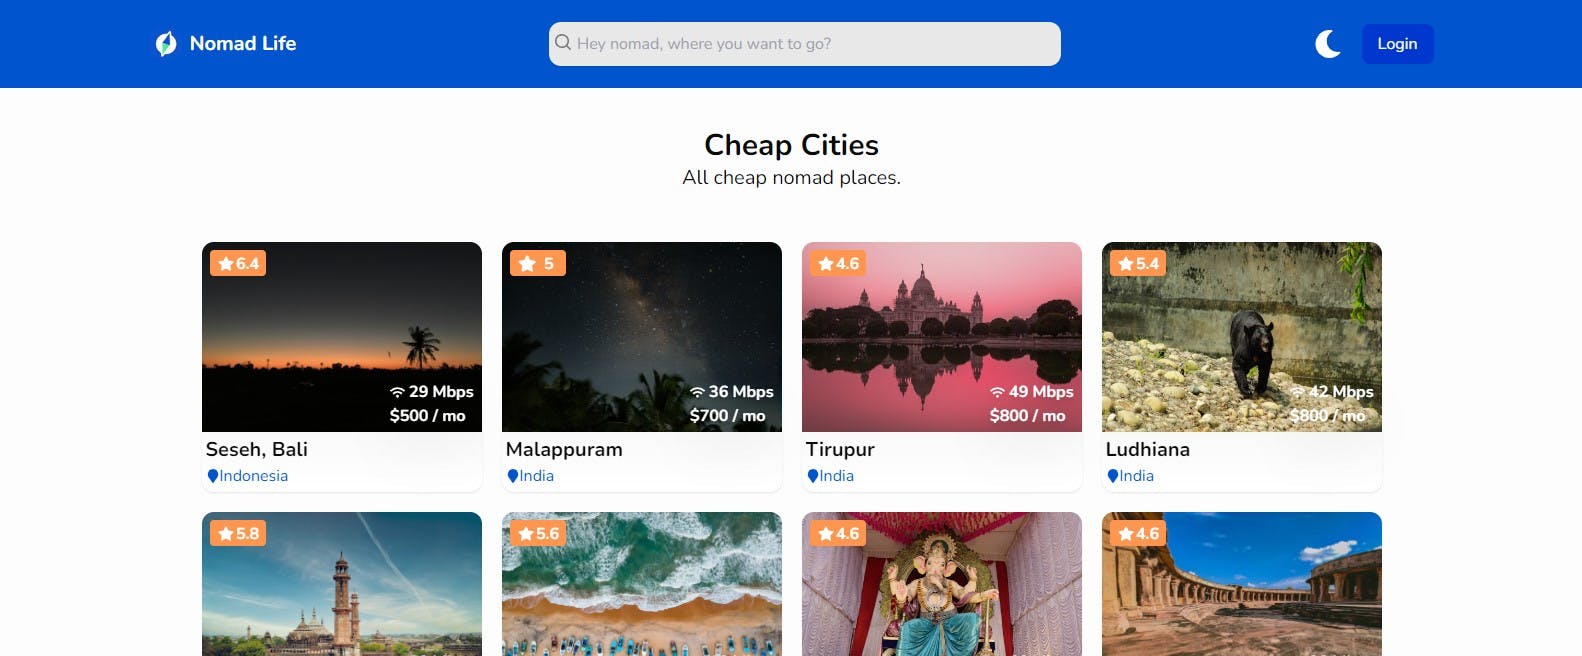 Nomadlyf - Cheap Cities Nomad List